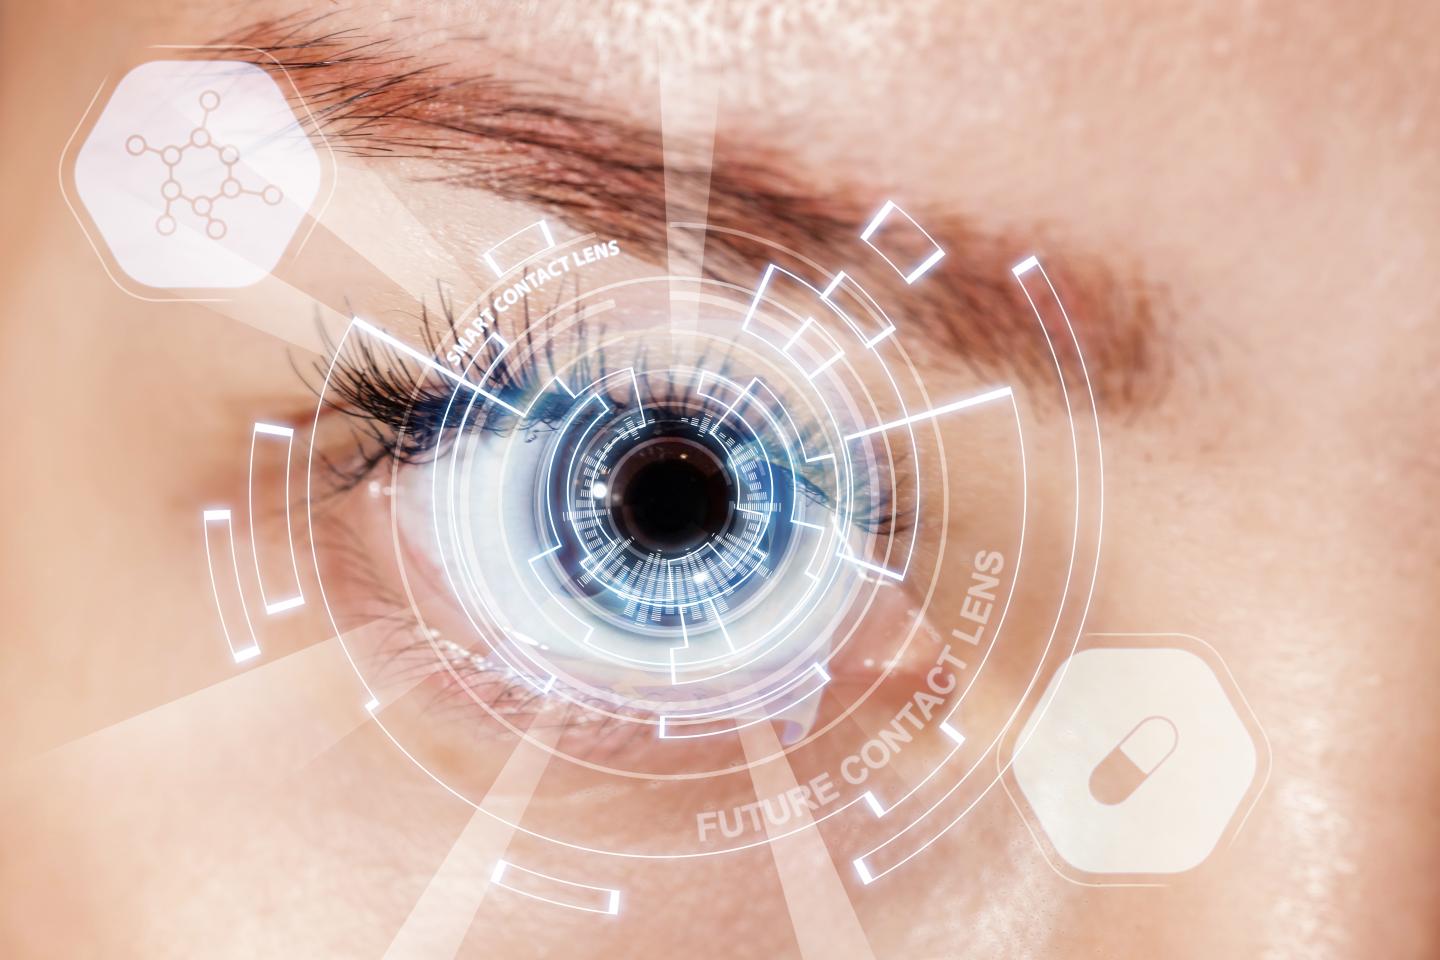 Contact Lens Technologies of the Future